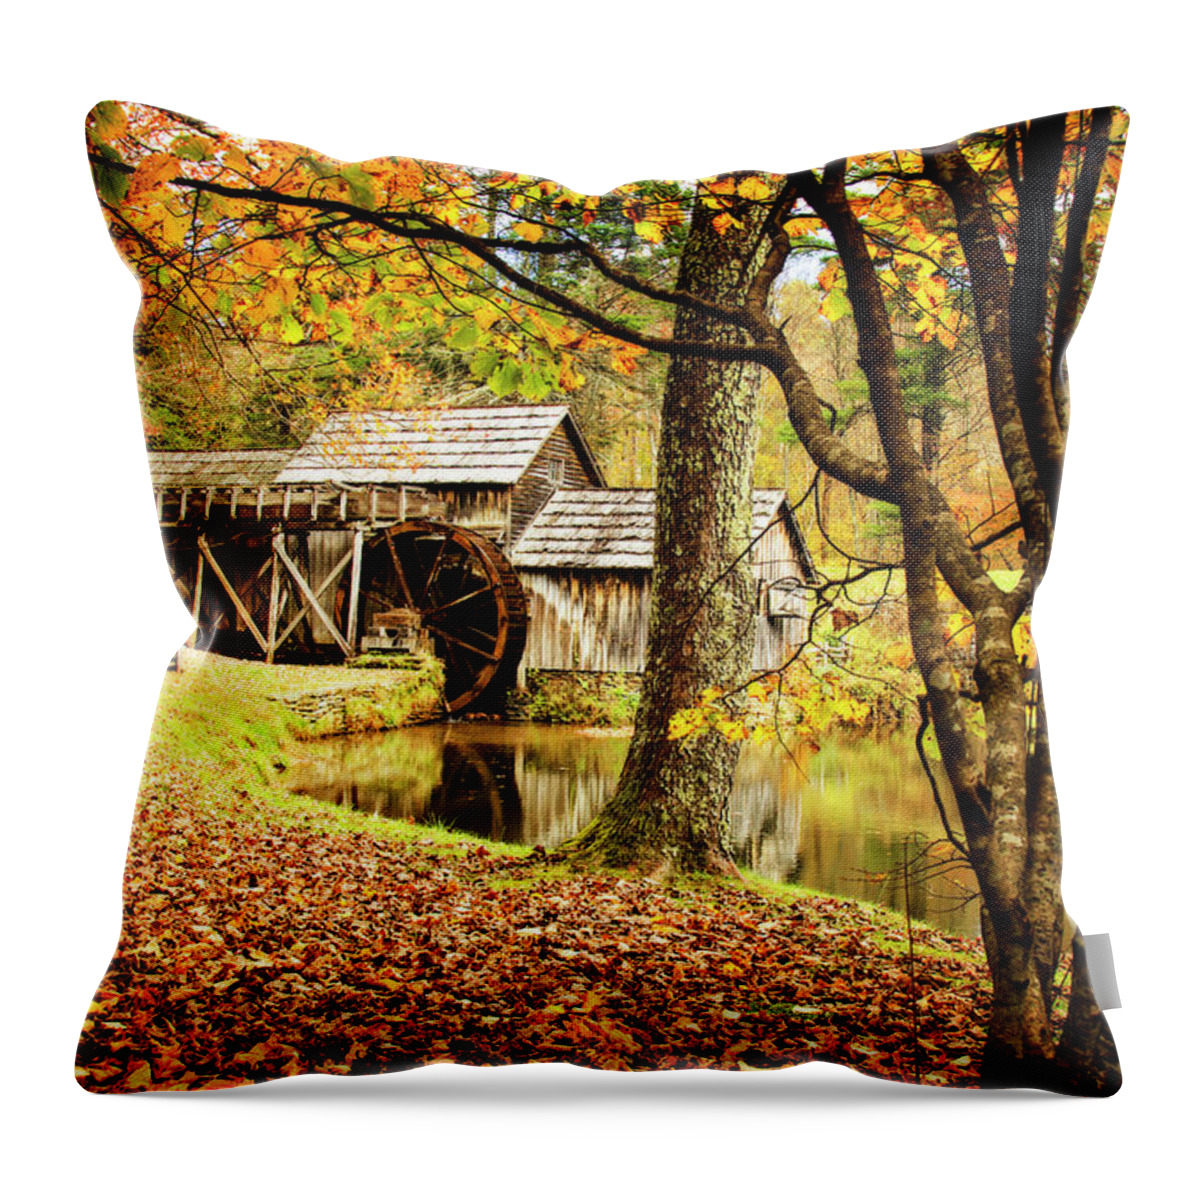 Color Throw Pillow featuring the photograph Mabry Mill -2 by Alan Hausenflock